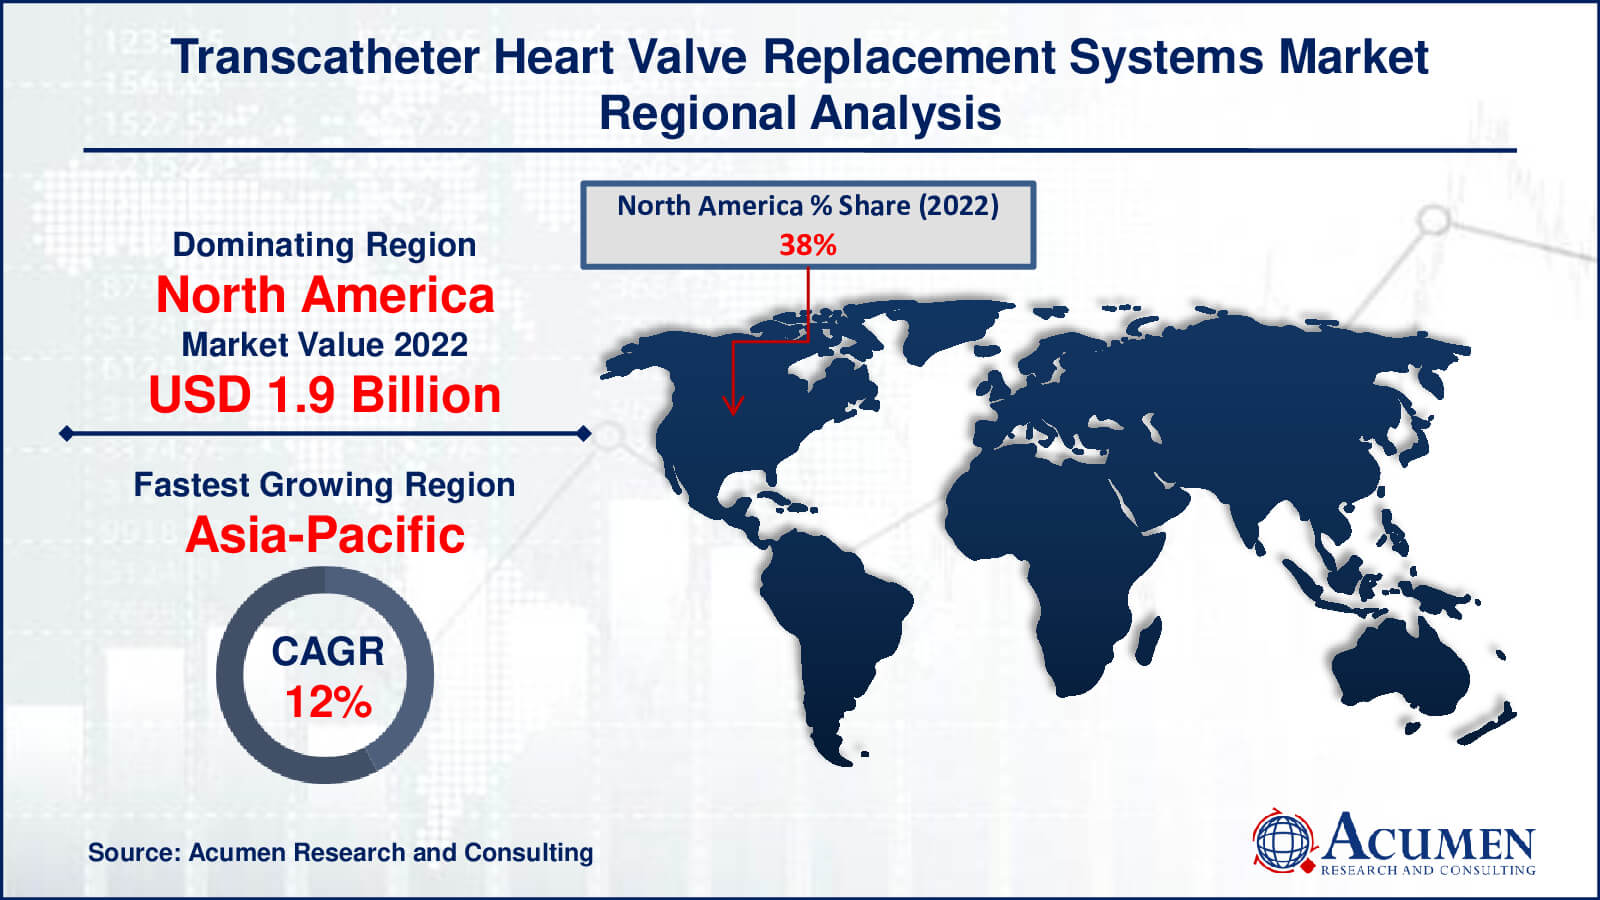 Transcatheter Heart Valve Replacement Systems Market Drivers